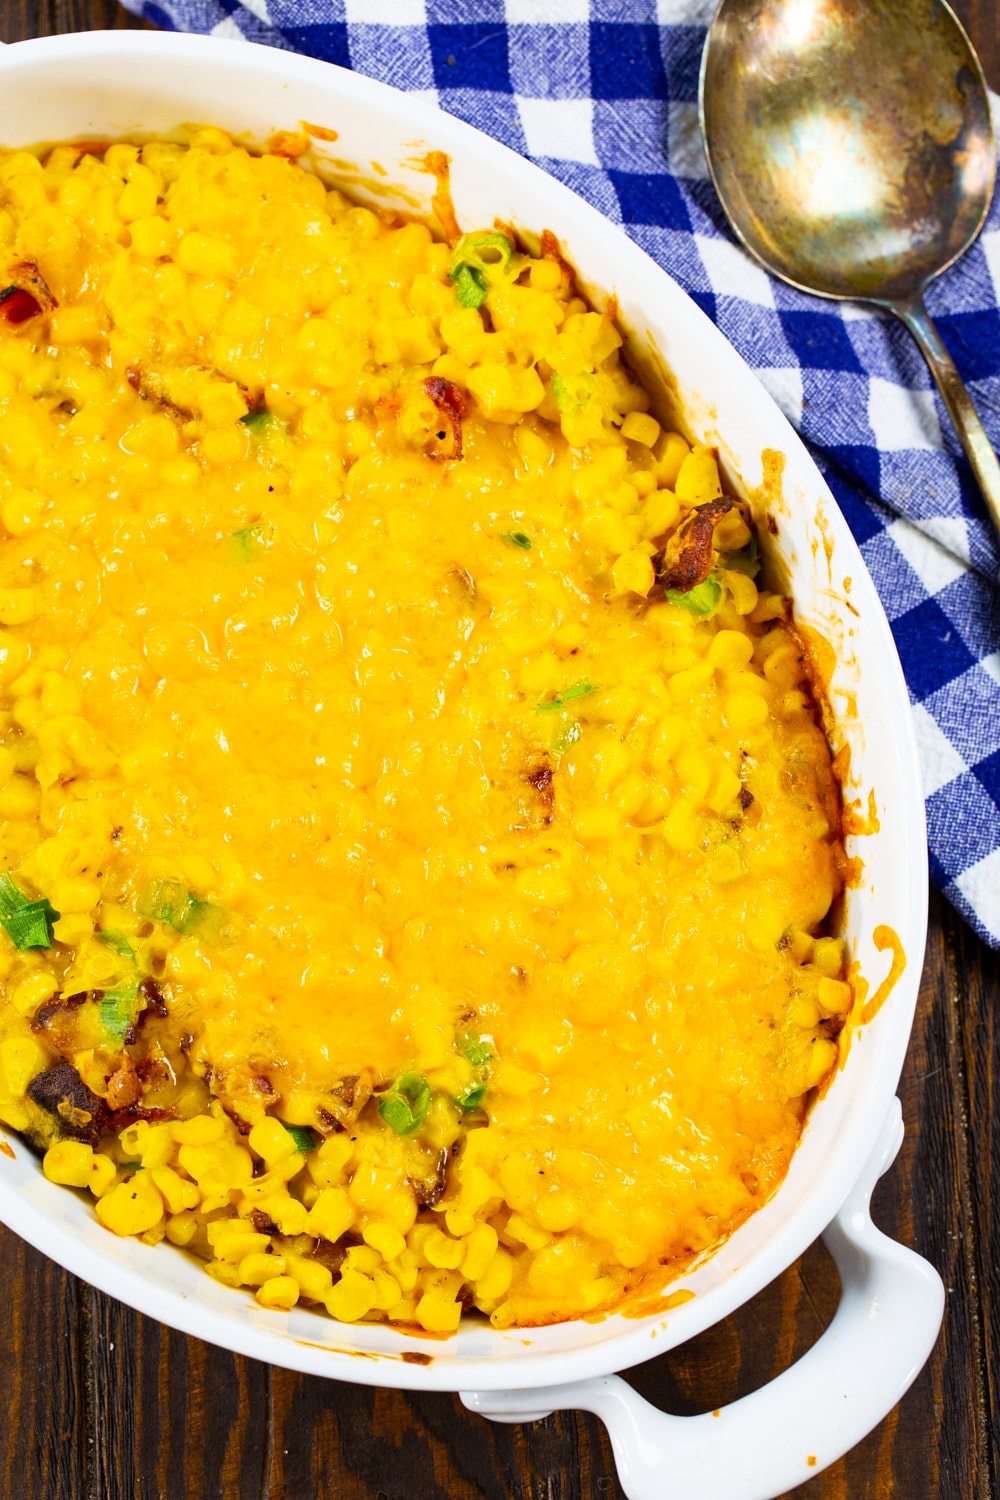 Corn Casserole with bacon in baking dish.